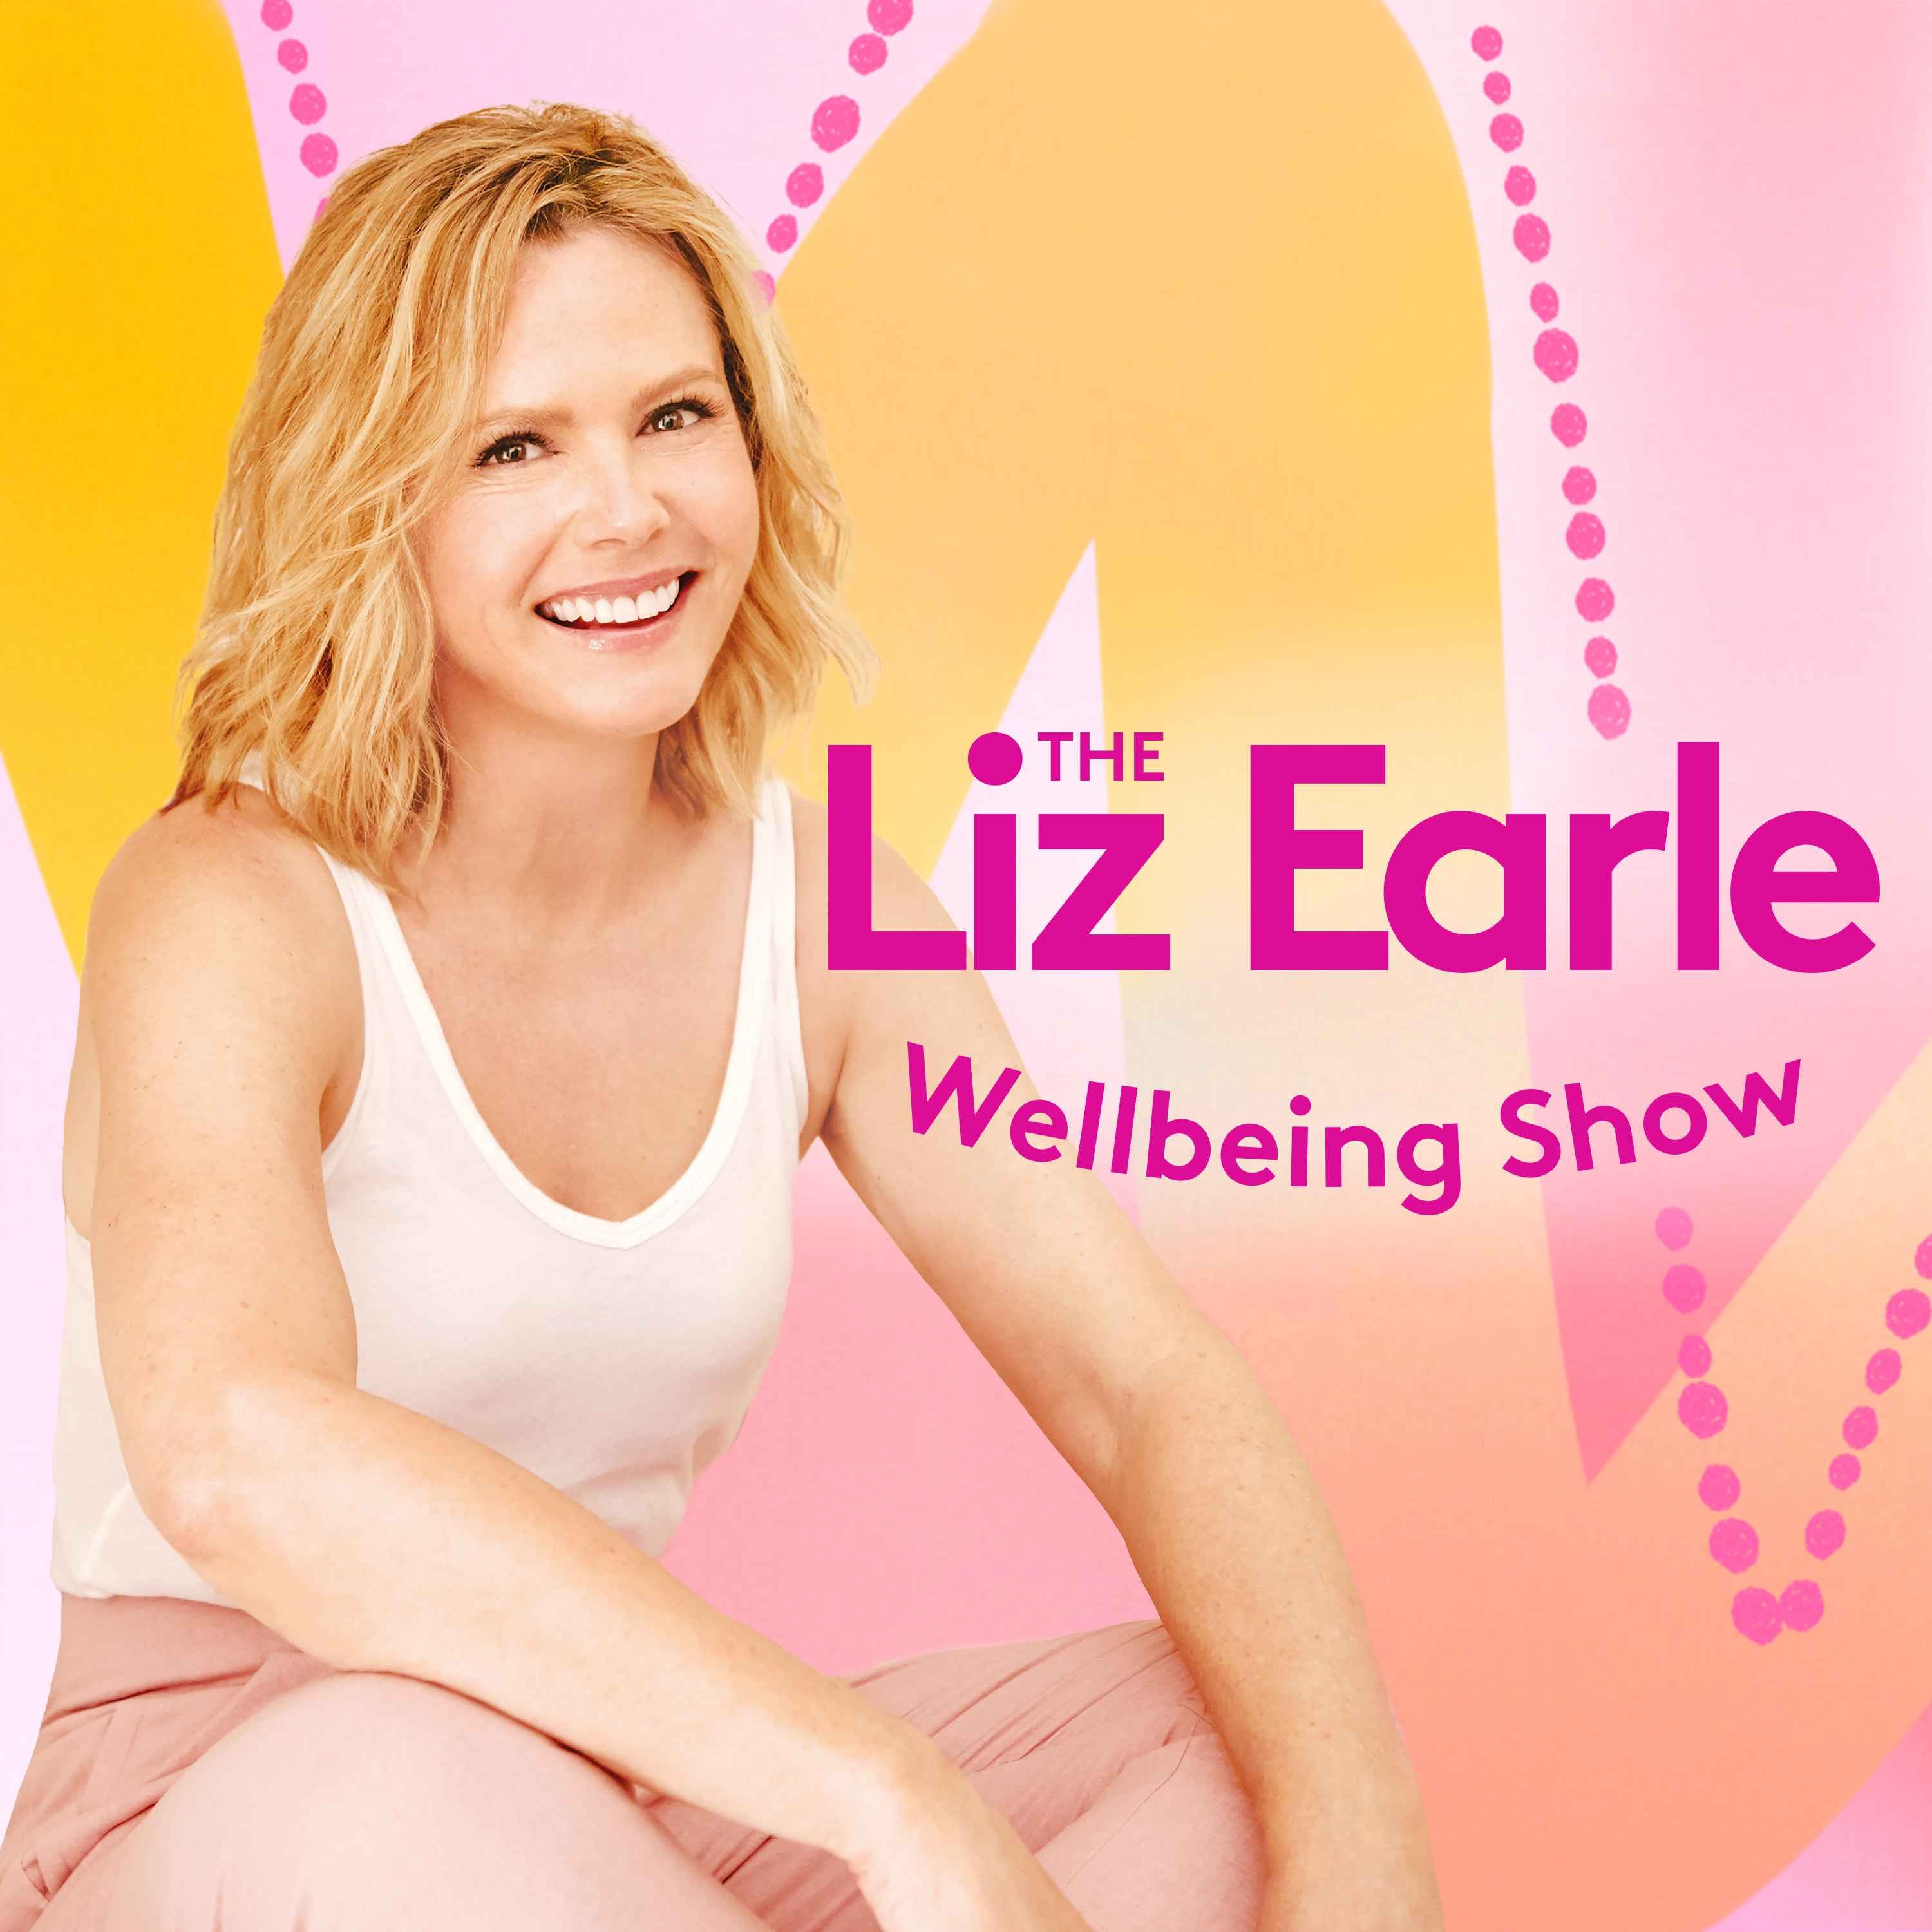 The Liz Earle Wellbeing Show podcast